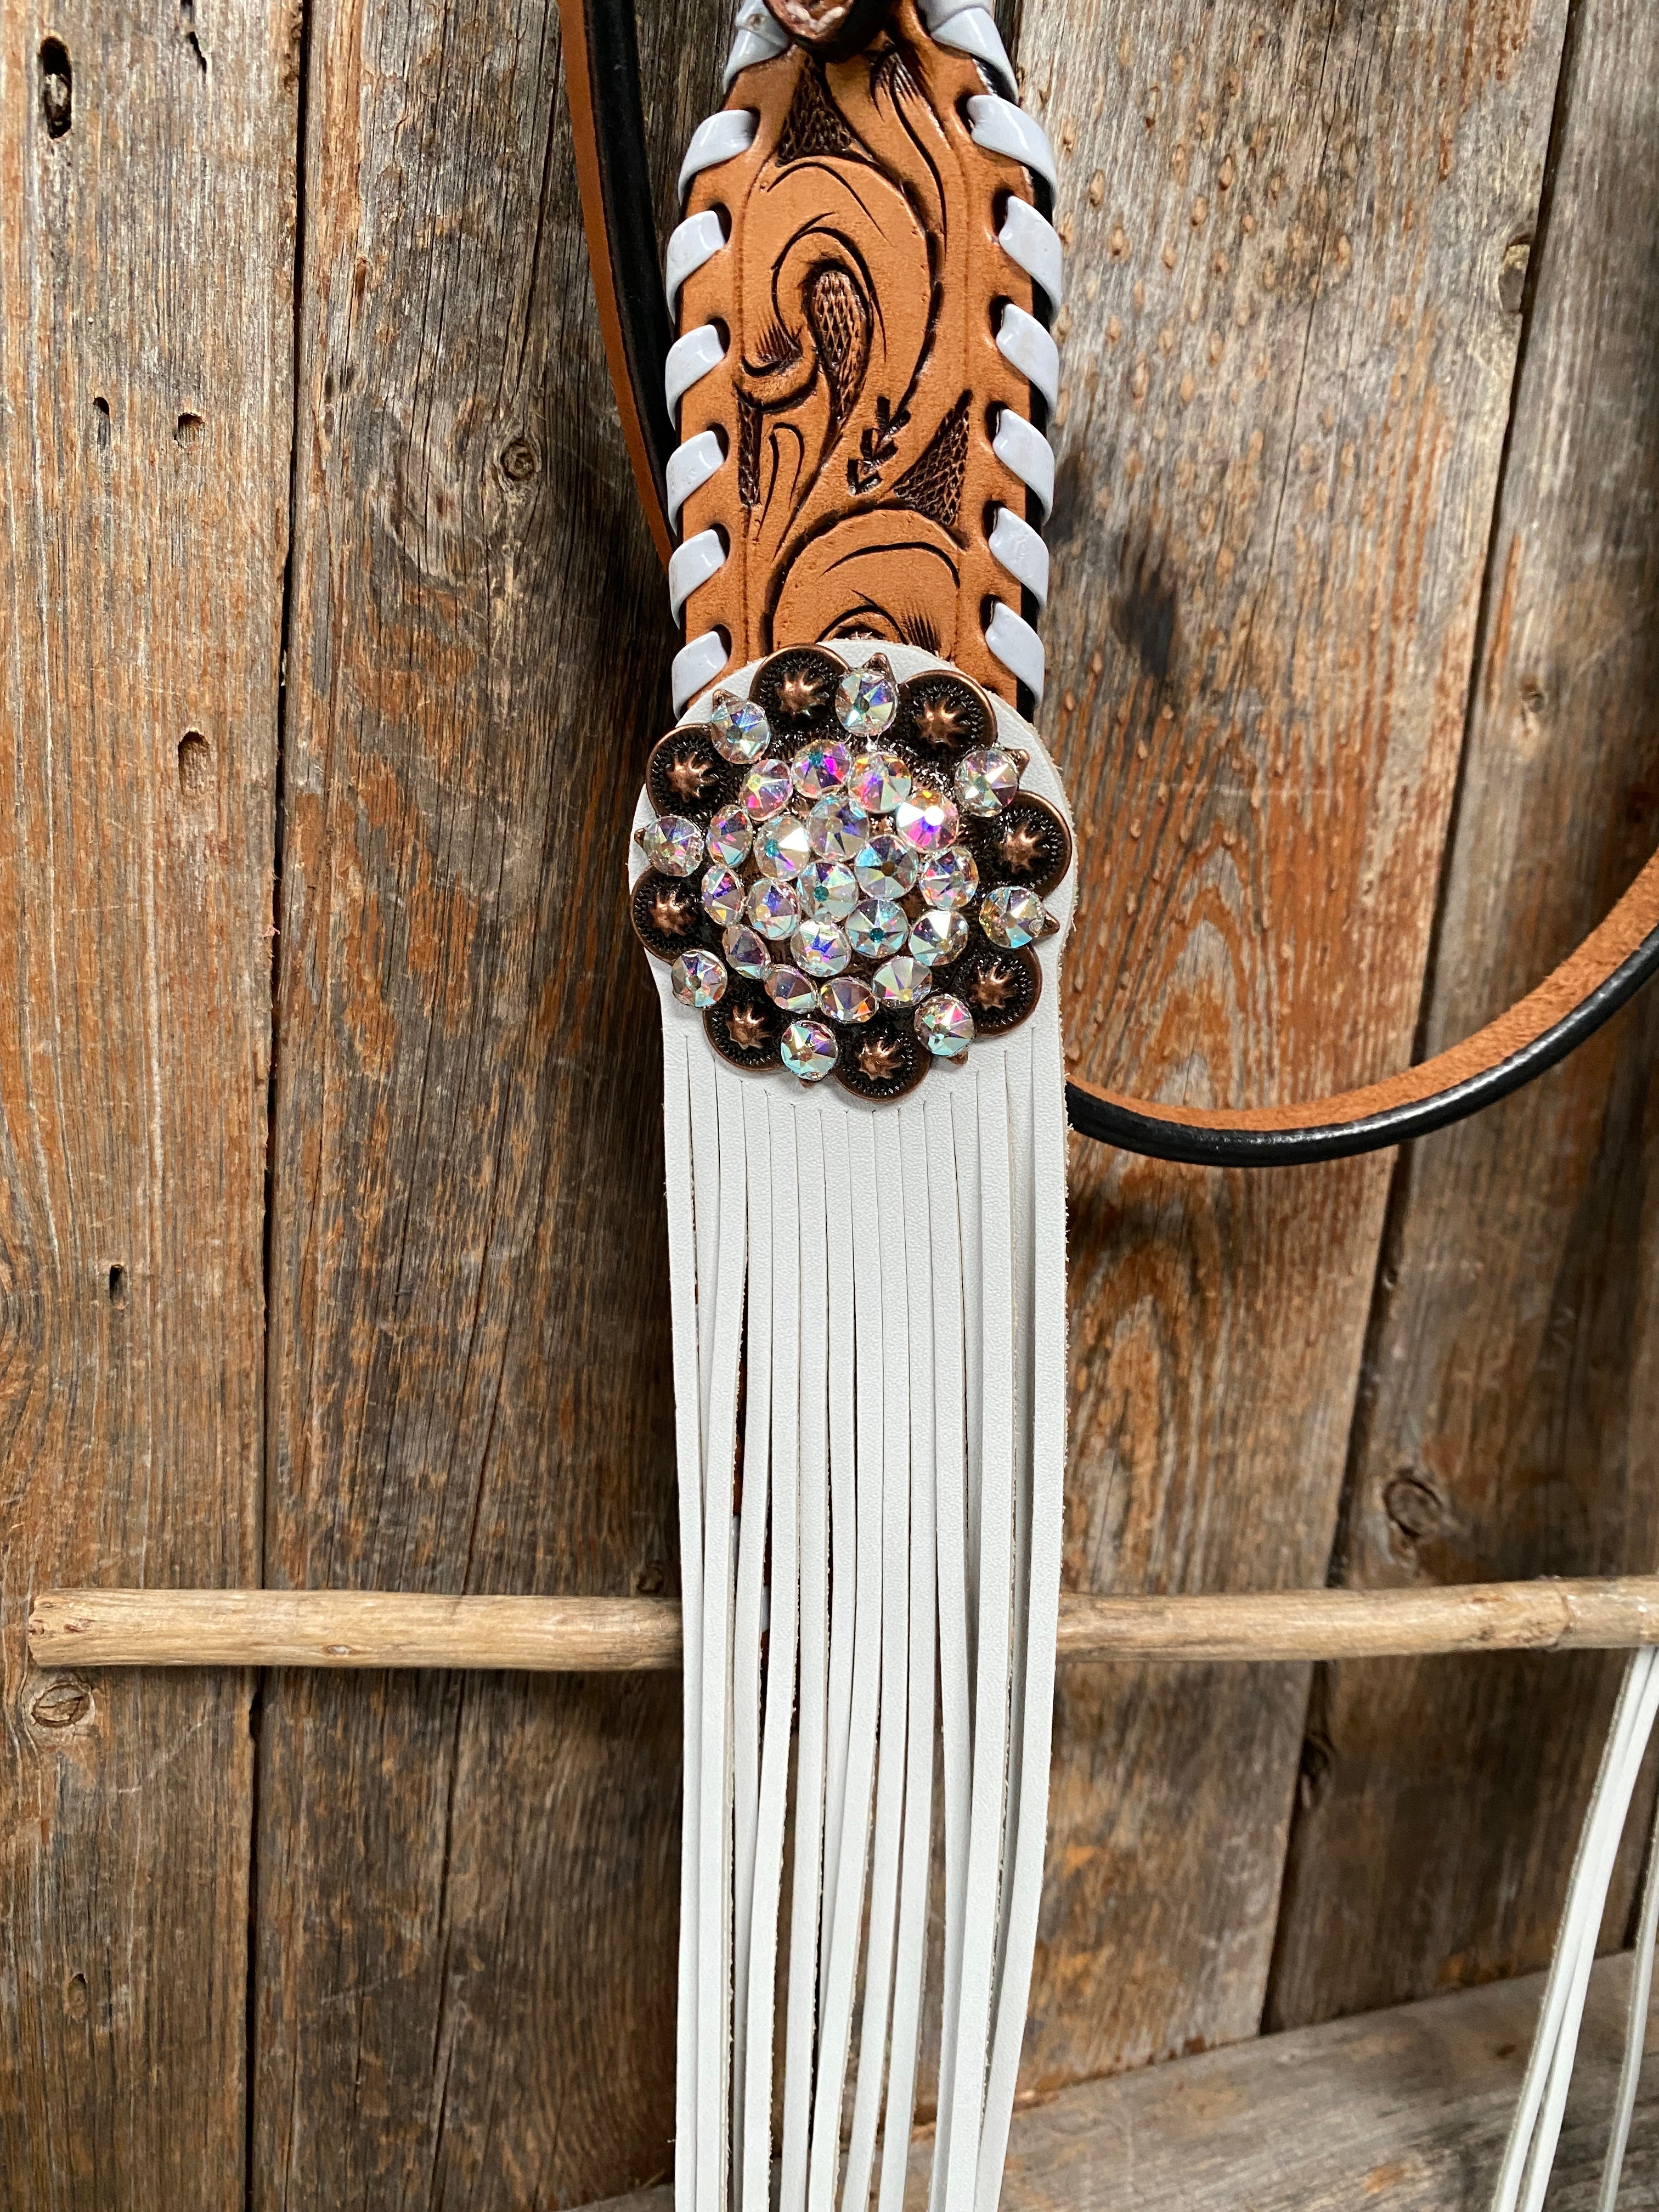 Whipstitch AB Browband/One Ear Tack Set with Wither Strap #BBBC458